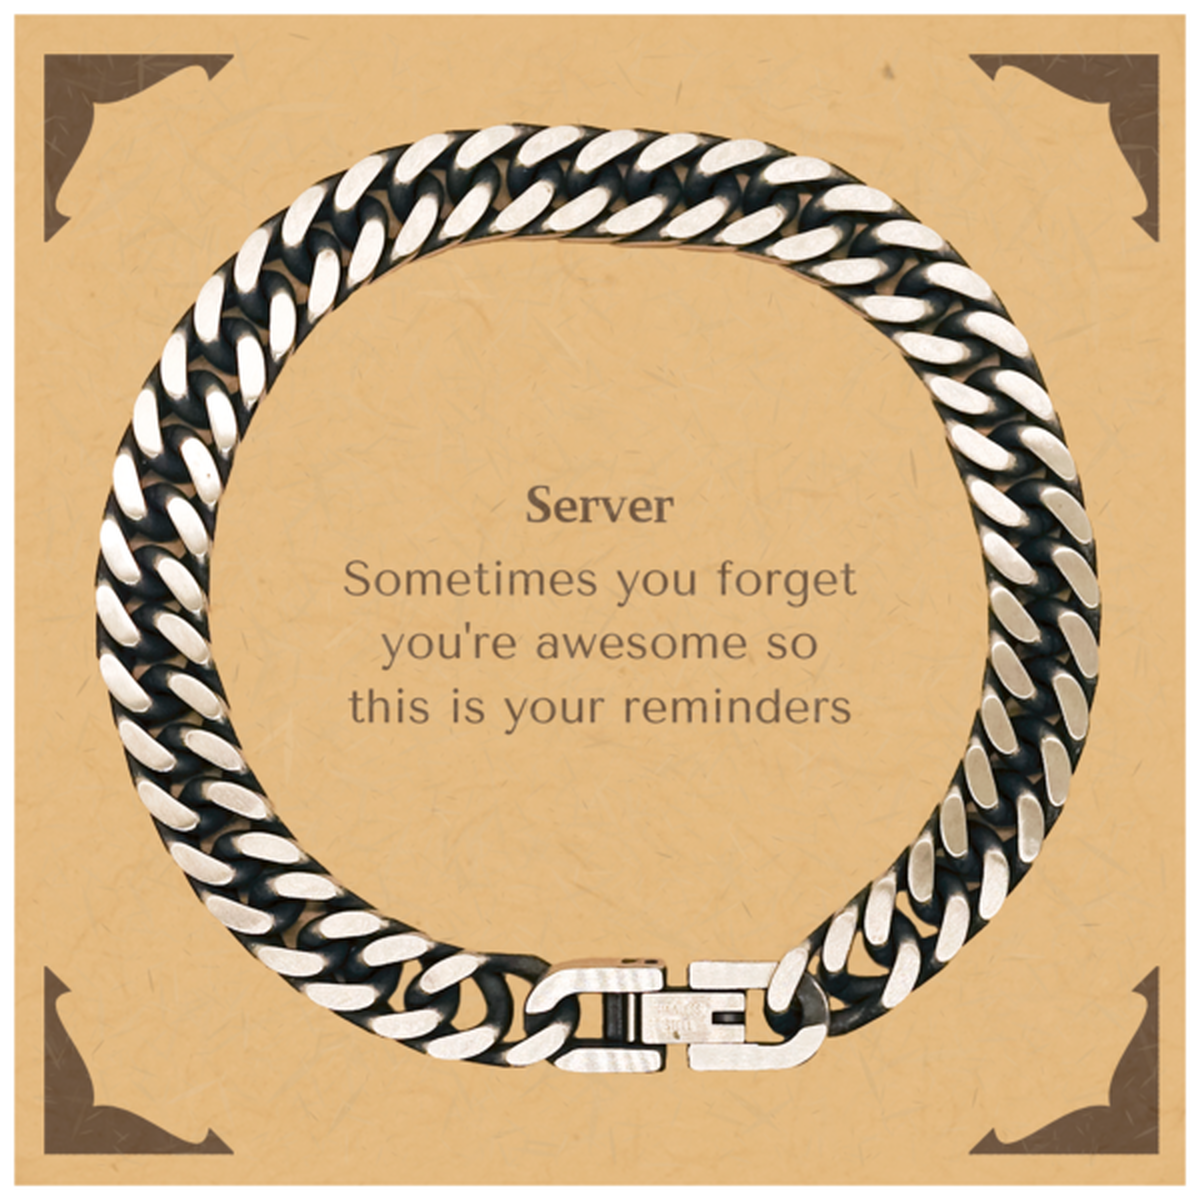 Sentimental Server Cuban Link Chain Bracelet, Server Sometimes you forget you're awesome so this is your reminders, Graduation Christmas Birthday Gifts for Server, Men, Women, Coworkers